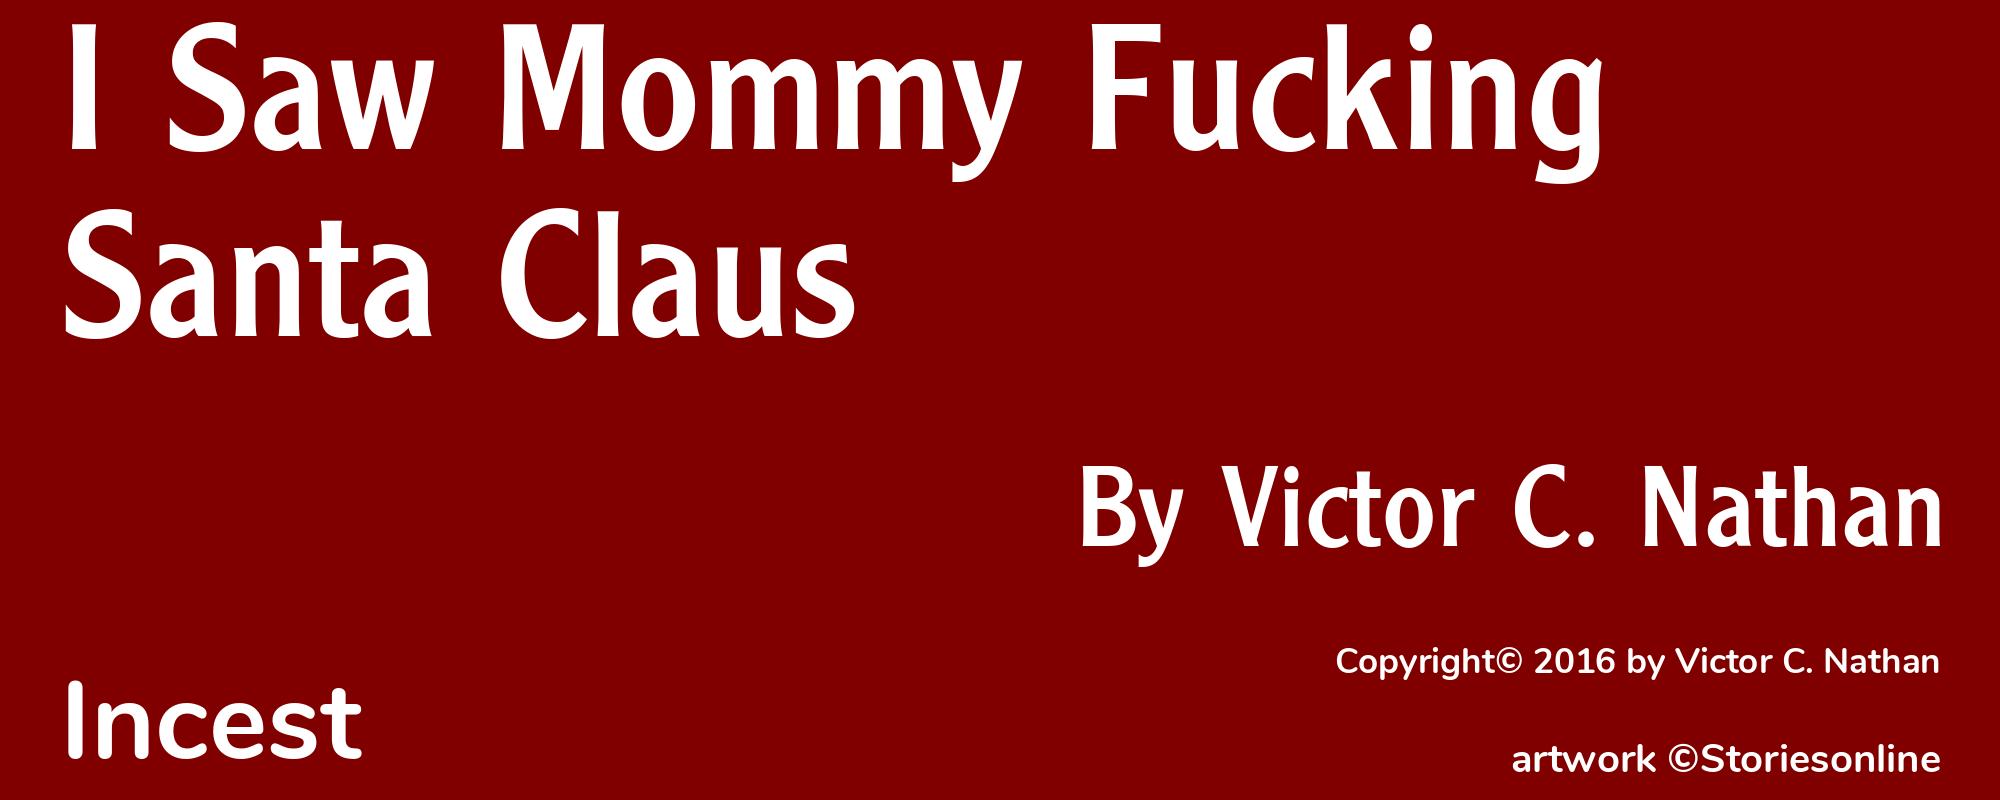 I Saw Mommy Fucking Santa Claus - Cover